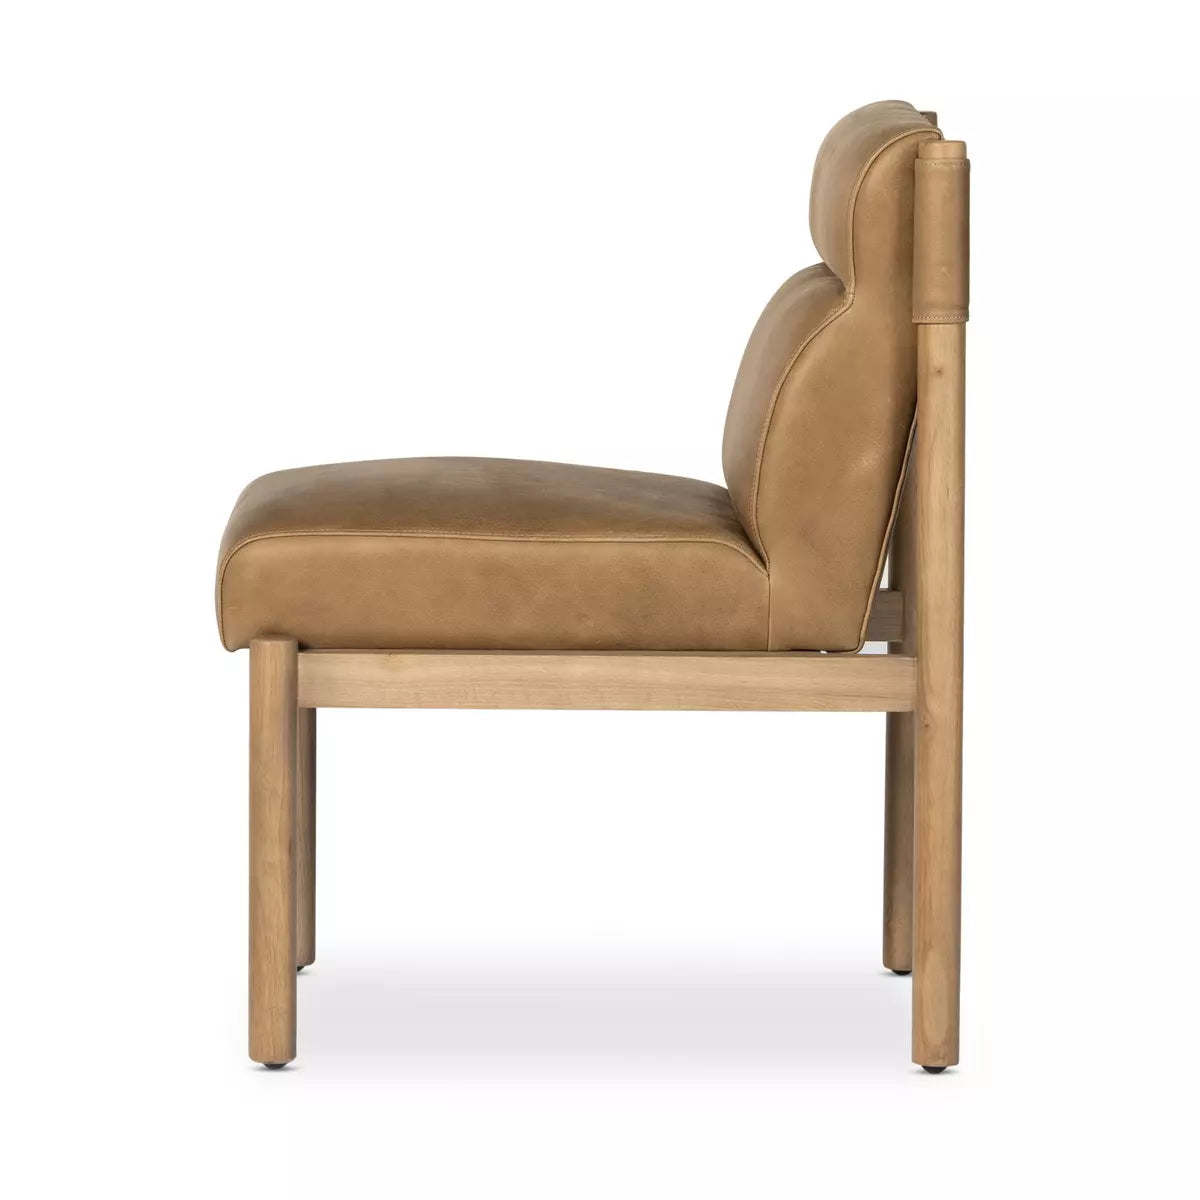 Anniston Dining Chair